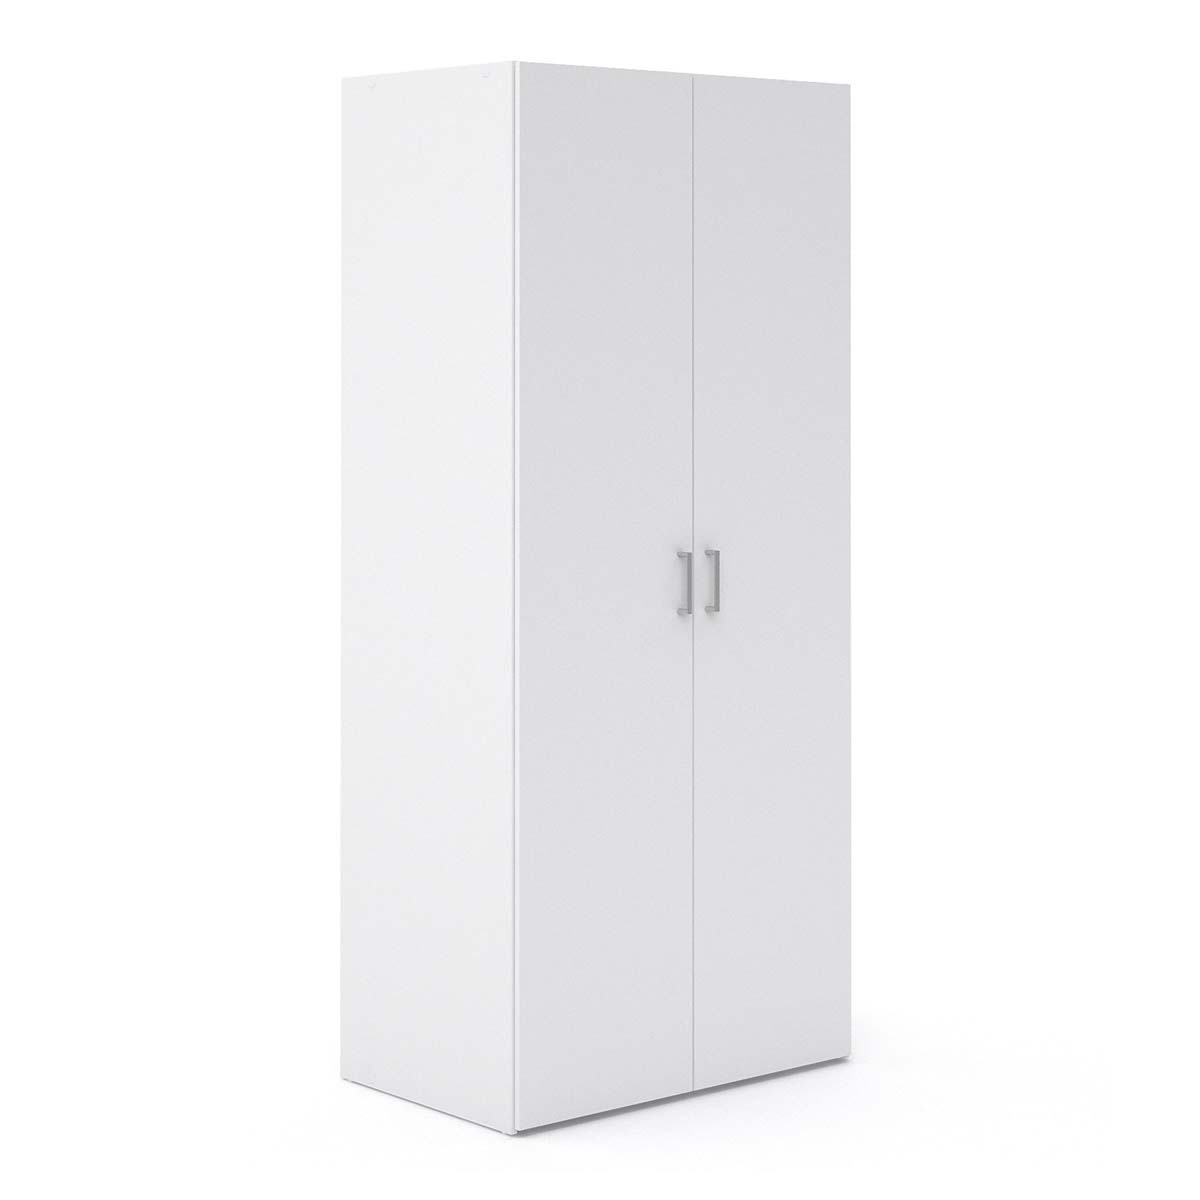 Space Wardrobe with 2 doors (175) White